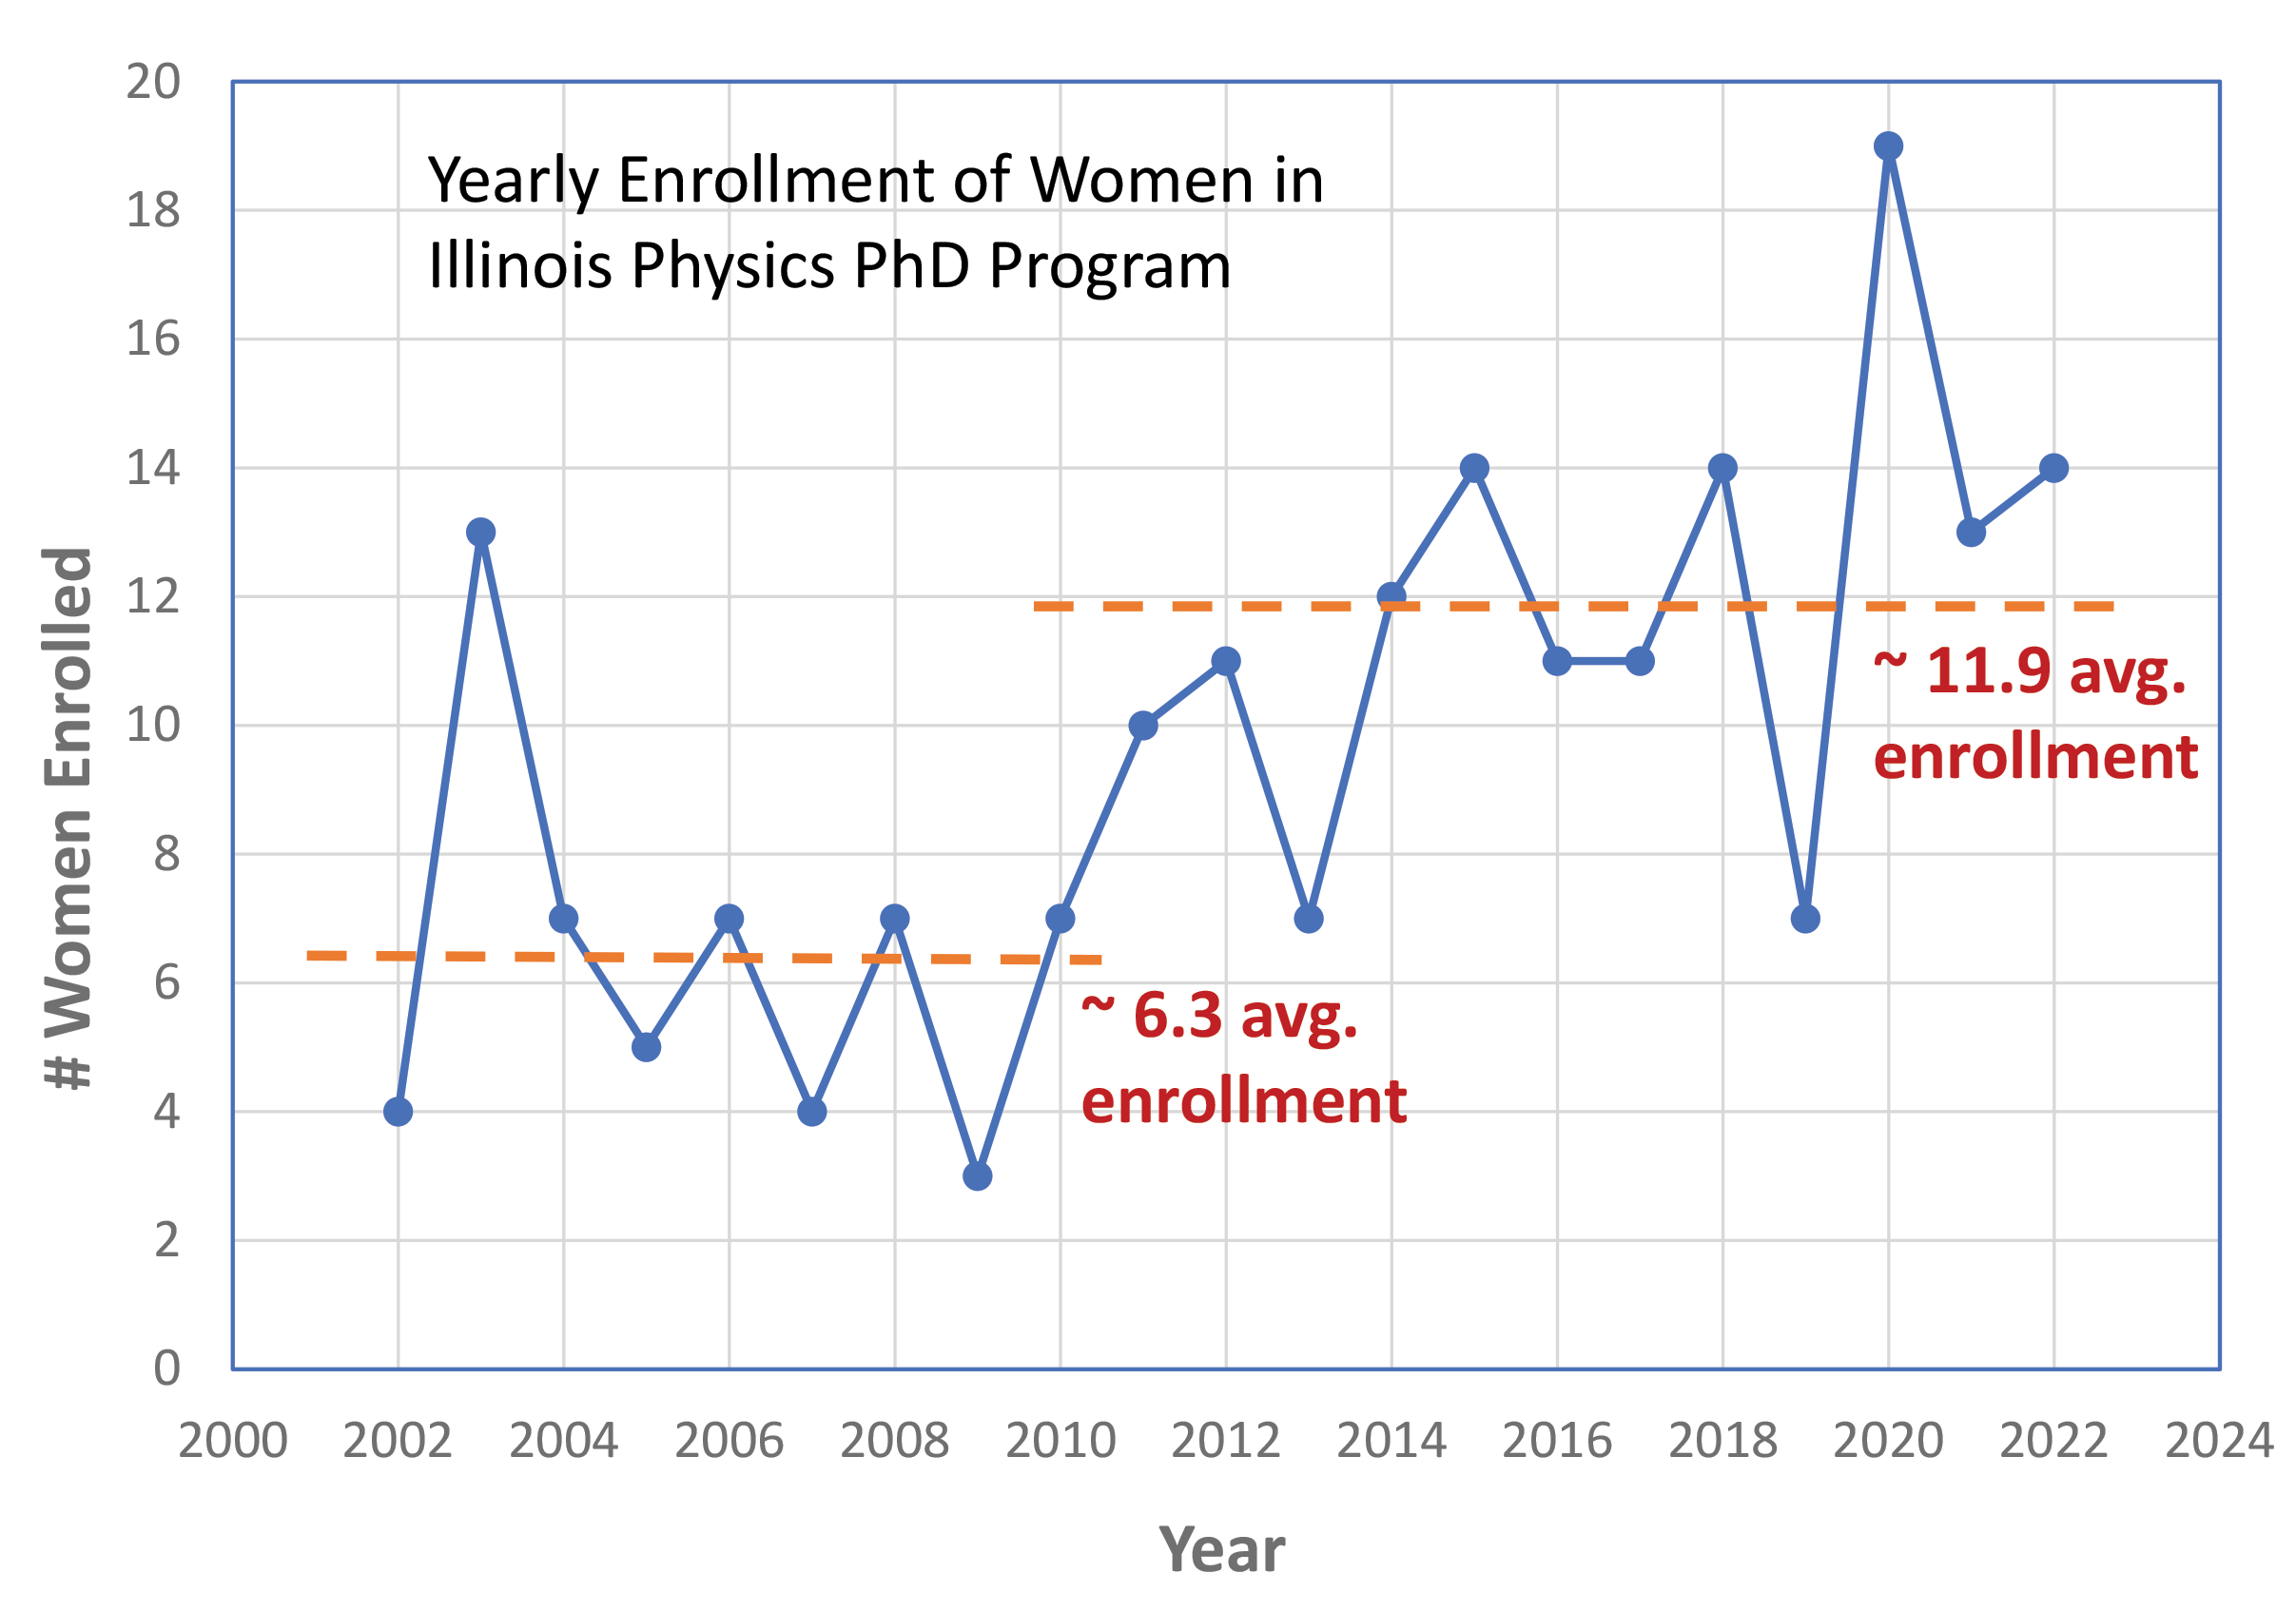 [cr][lf]<p>Figure 4: Top, From 2004 to 2022, the number of Illinois Physics women PhD graduates trends slowly upward. Bottom, Bottom, breaking through a plateau in the number of first-year women PhD enrollments in the 2000s required thoughtful changes in admissions requirements and practices. Graphs courtesy of Lance Cooper, Illinois Physics</p>[cr][lf]